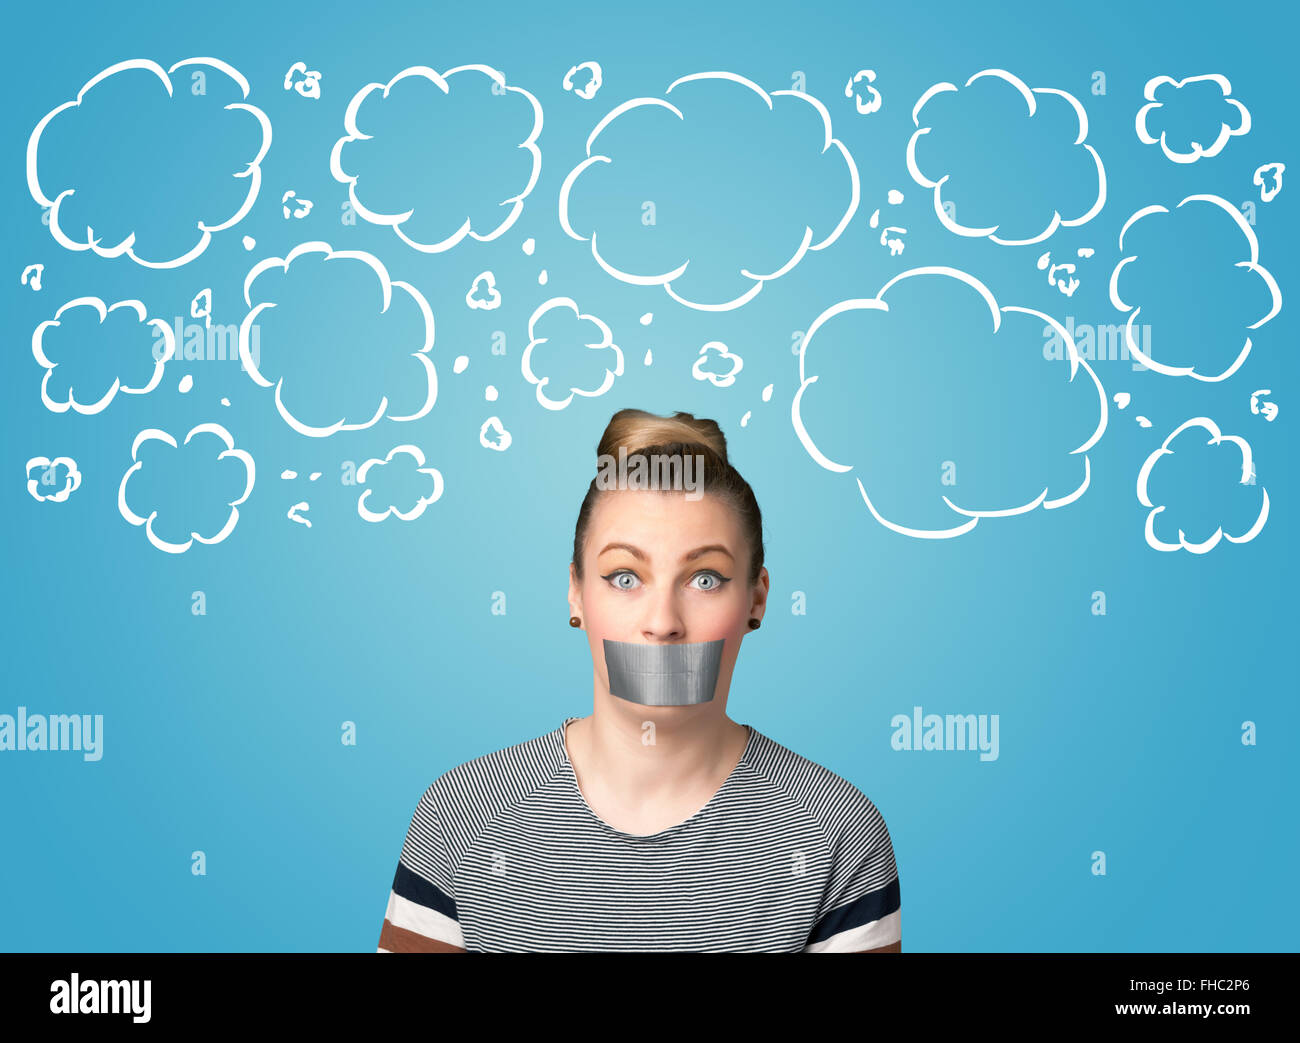 Funny person with taped mouth Stock Photo